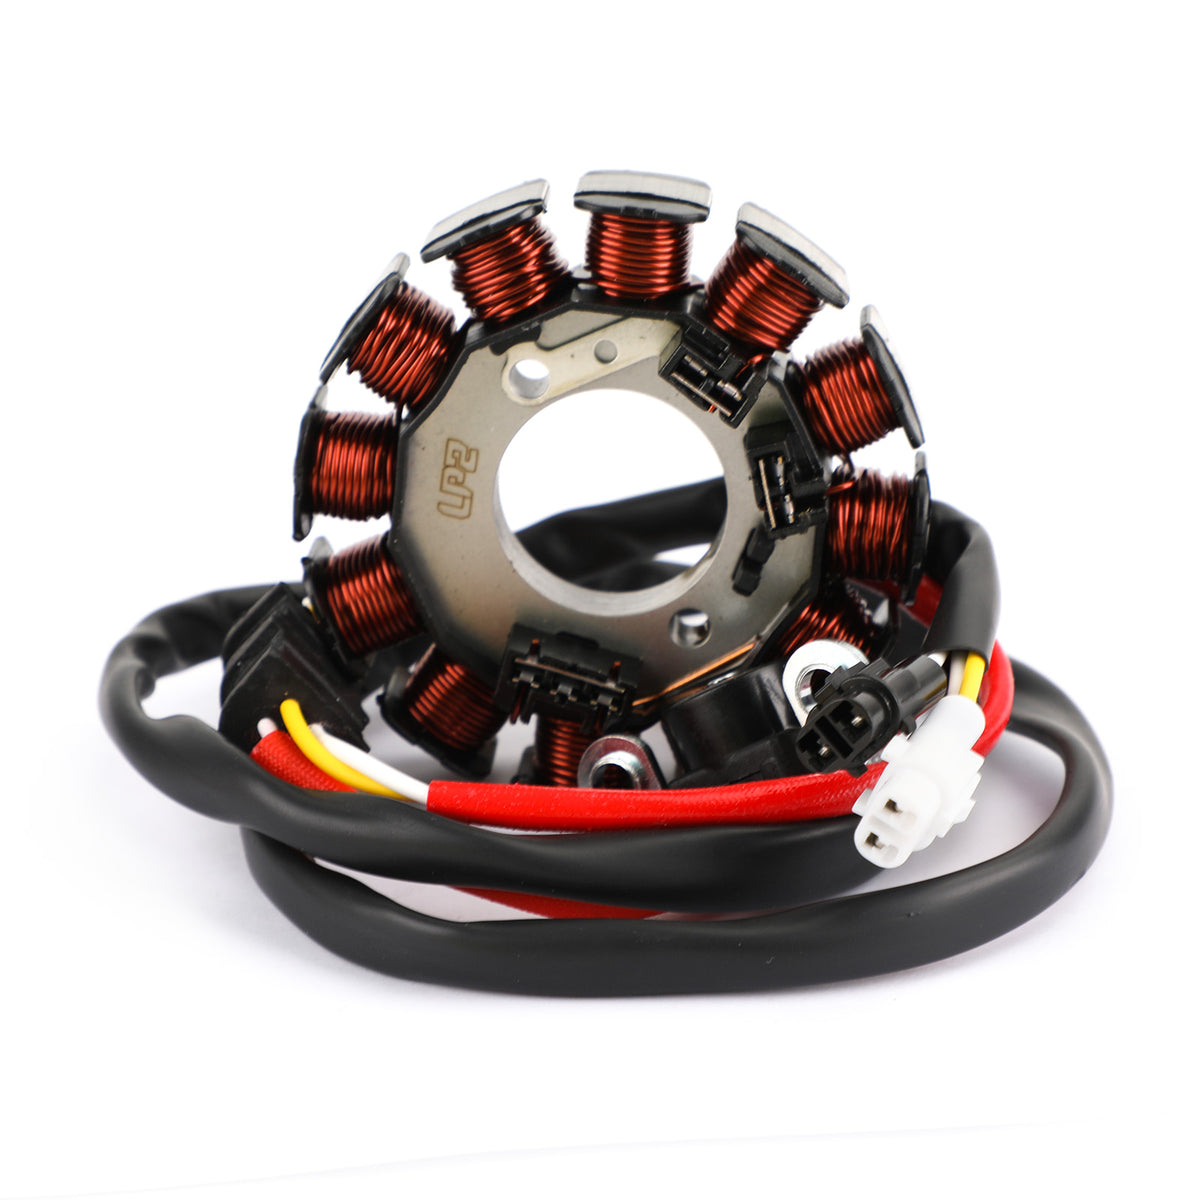 Magneto Generator Engine Stator Coil Fit For GAS GAS EC250F Enduro 4T 2013-2015 EC300F Racing 4T  EC300F Racing 4T 2015